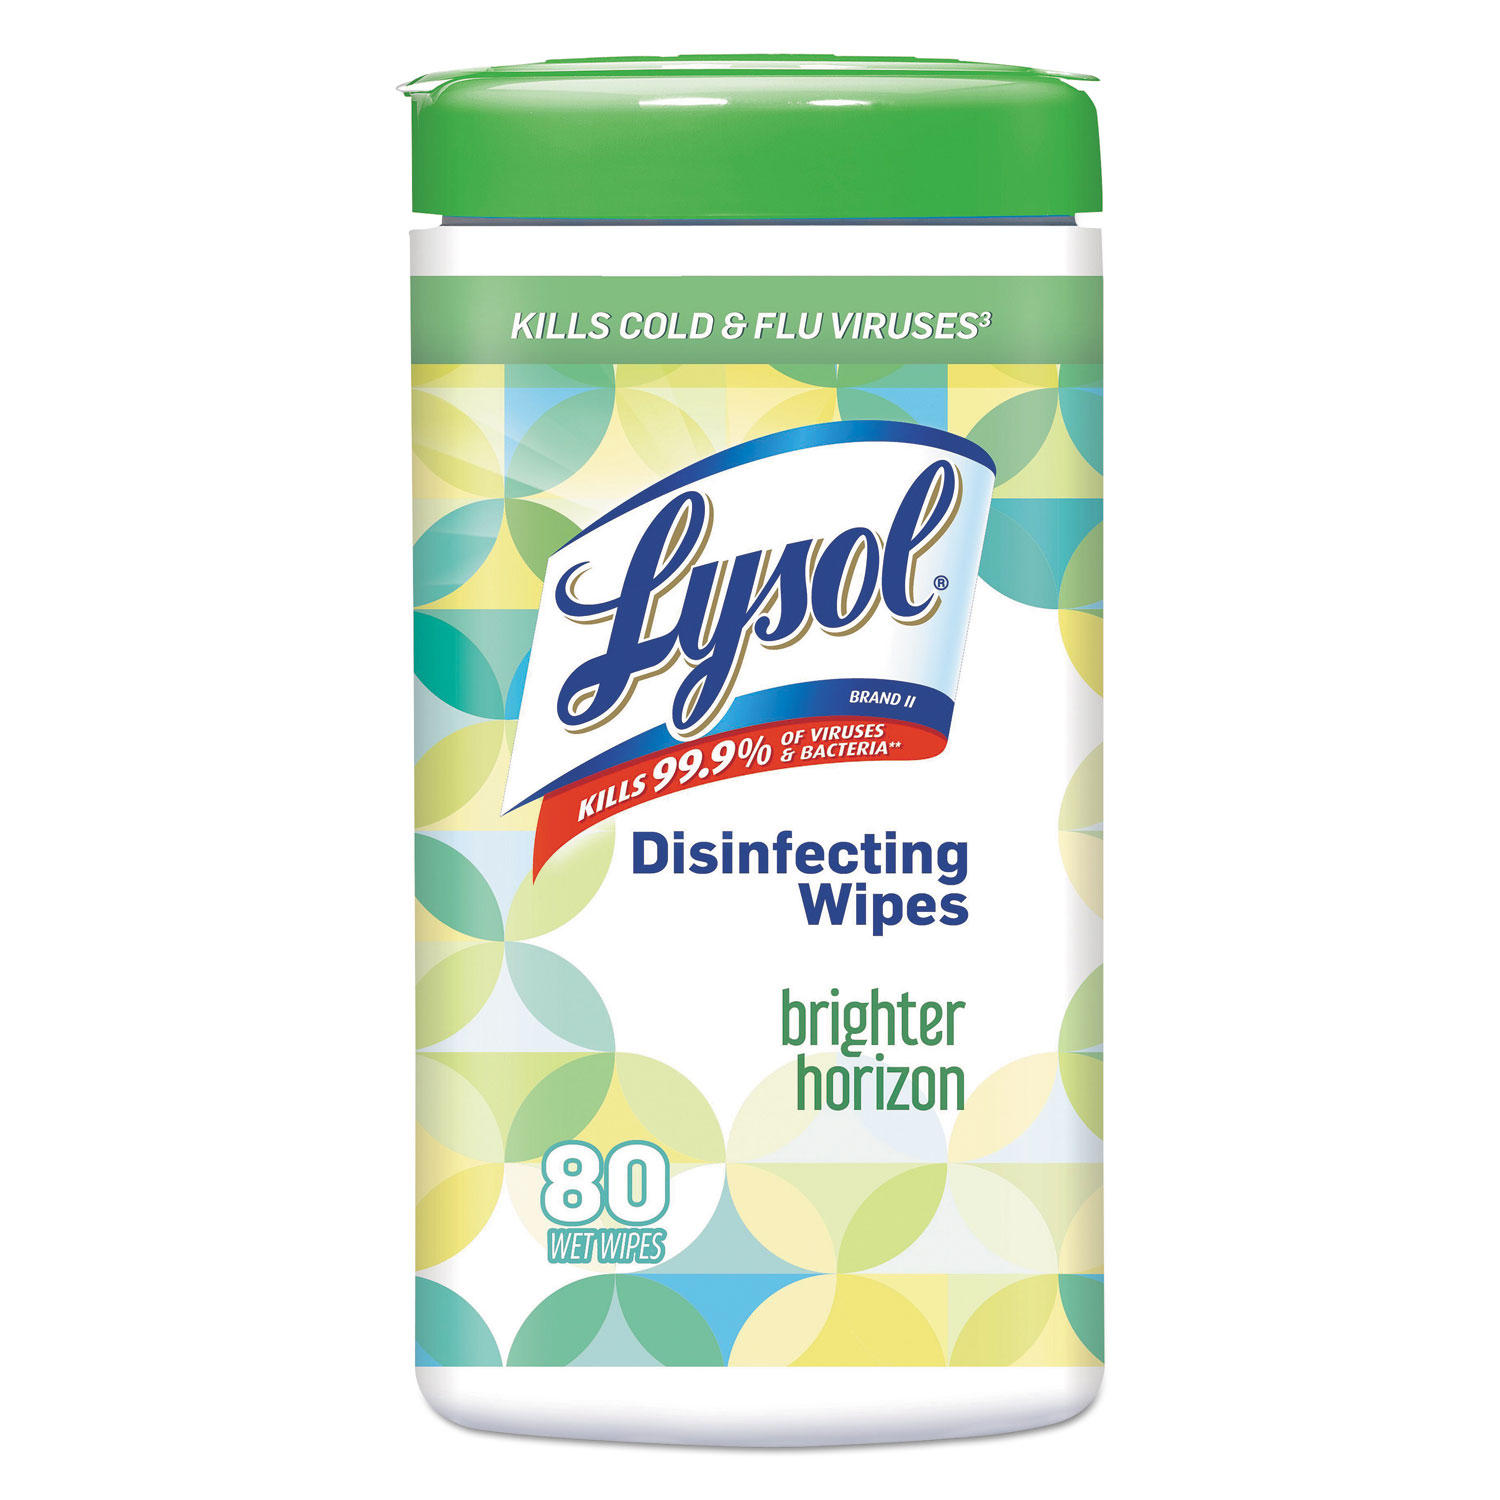  LYSOL Brand 19200-97180 Disinfecting Wipes, 7 x 8, Brighter Horizon, 80 Wipes/Canister, 6 Canisters/Carton (RAC97180) 